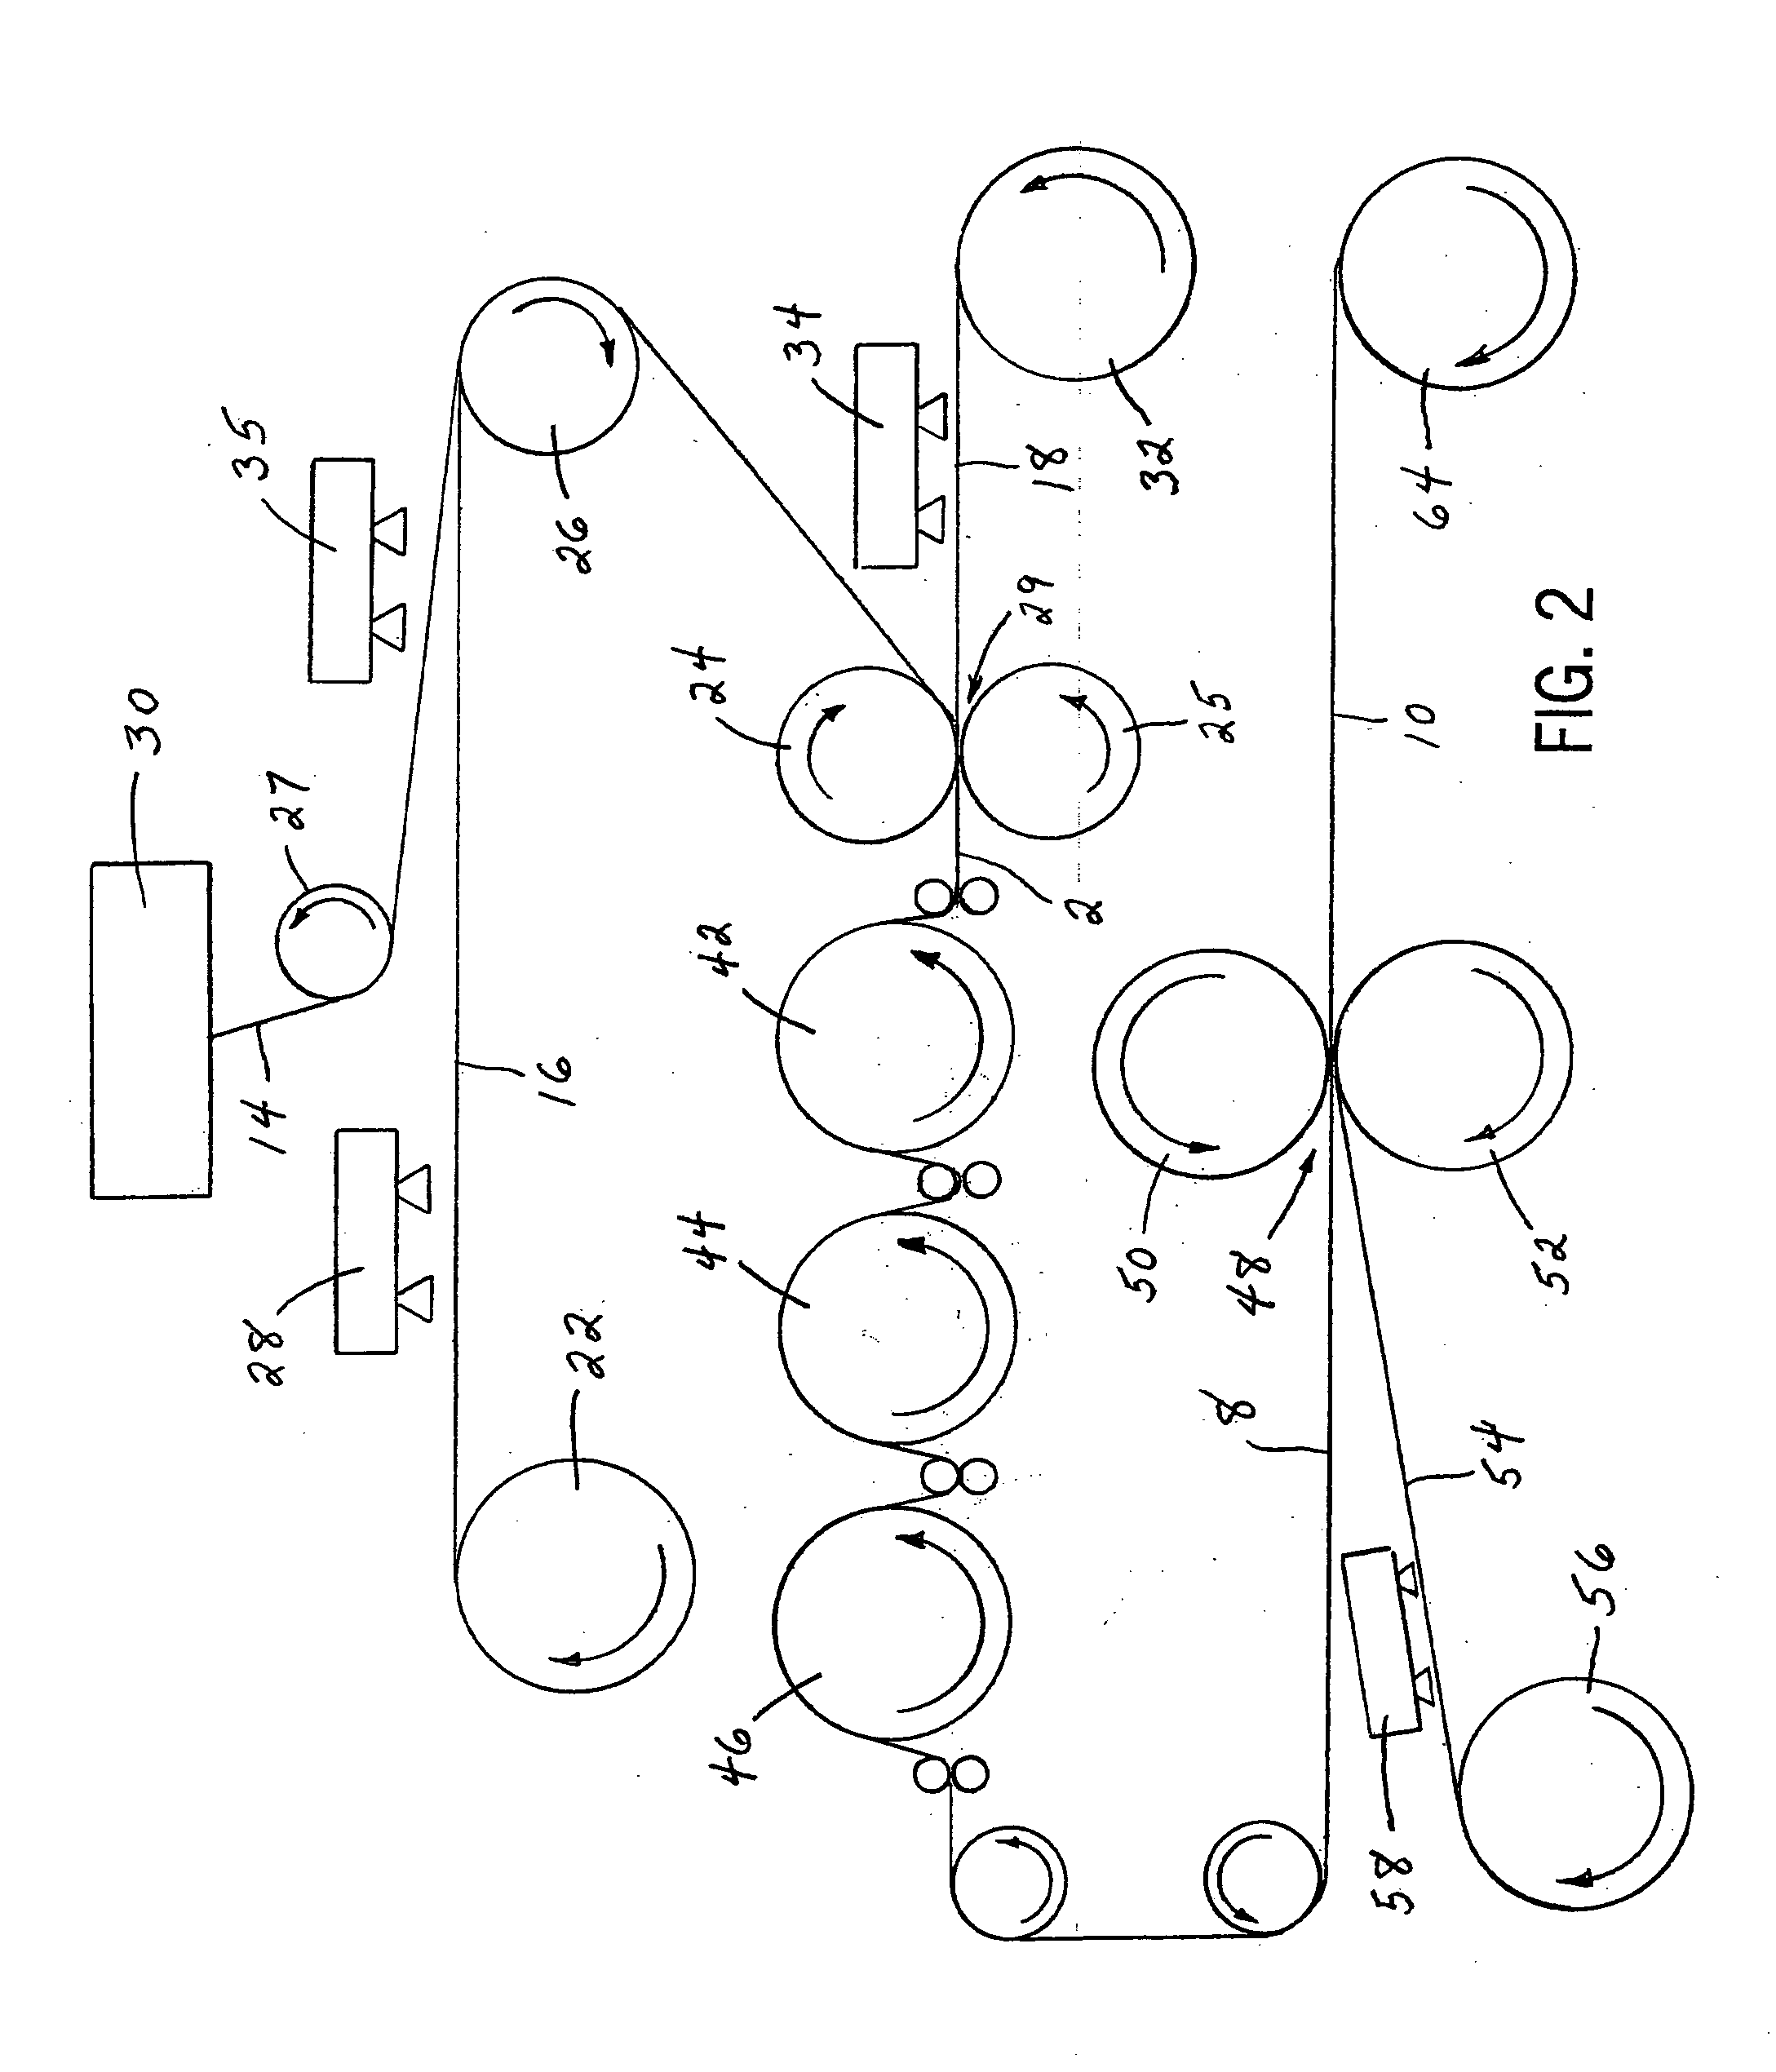 Method of making an elastic laminate using direct contact thermal rolls for controlling web contraction